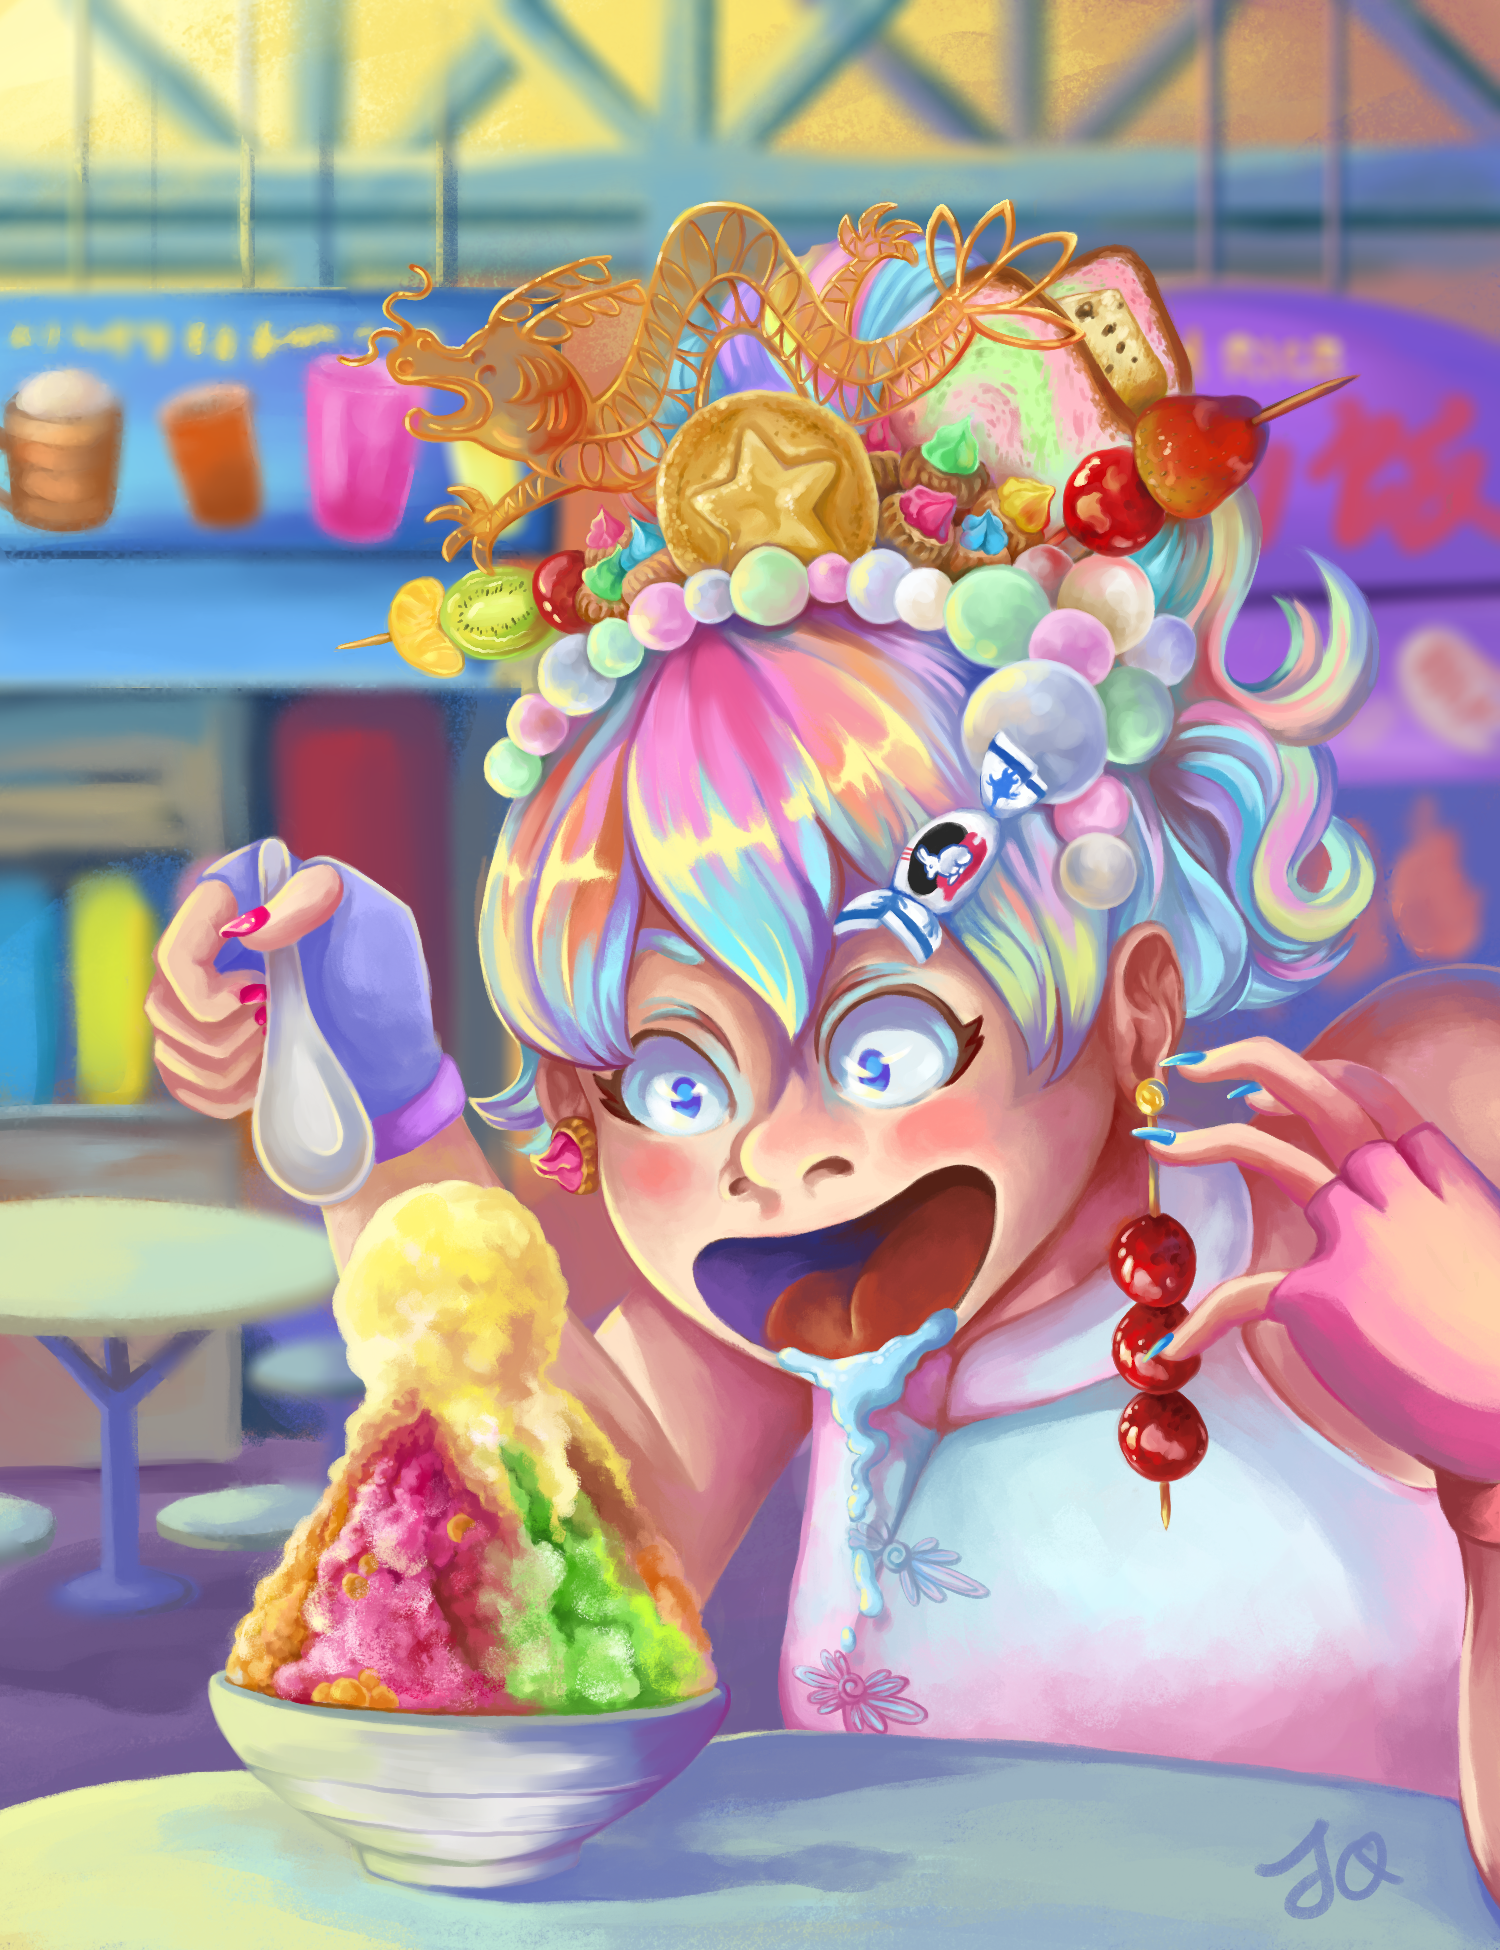 A digital painting of a young lady, sitting in a hawker center, with a colorful head of candy-colored hair topped with all sorts of Asian desserts as accessories, looking greedily at a huge bowl of durian ice kacang as she prepares to devour it